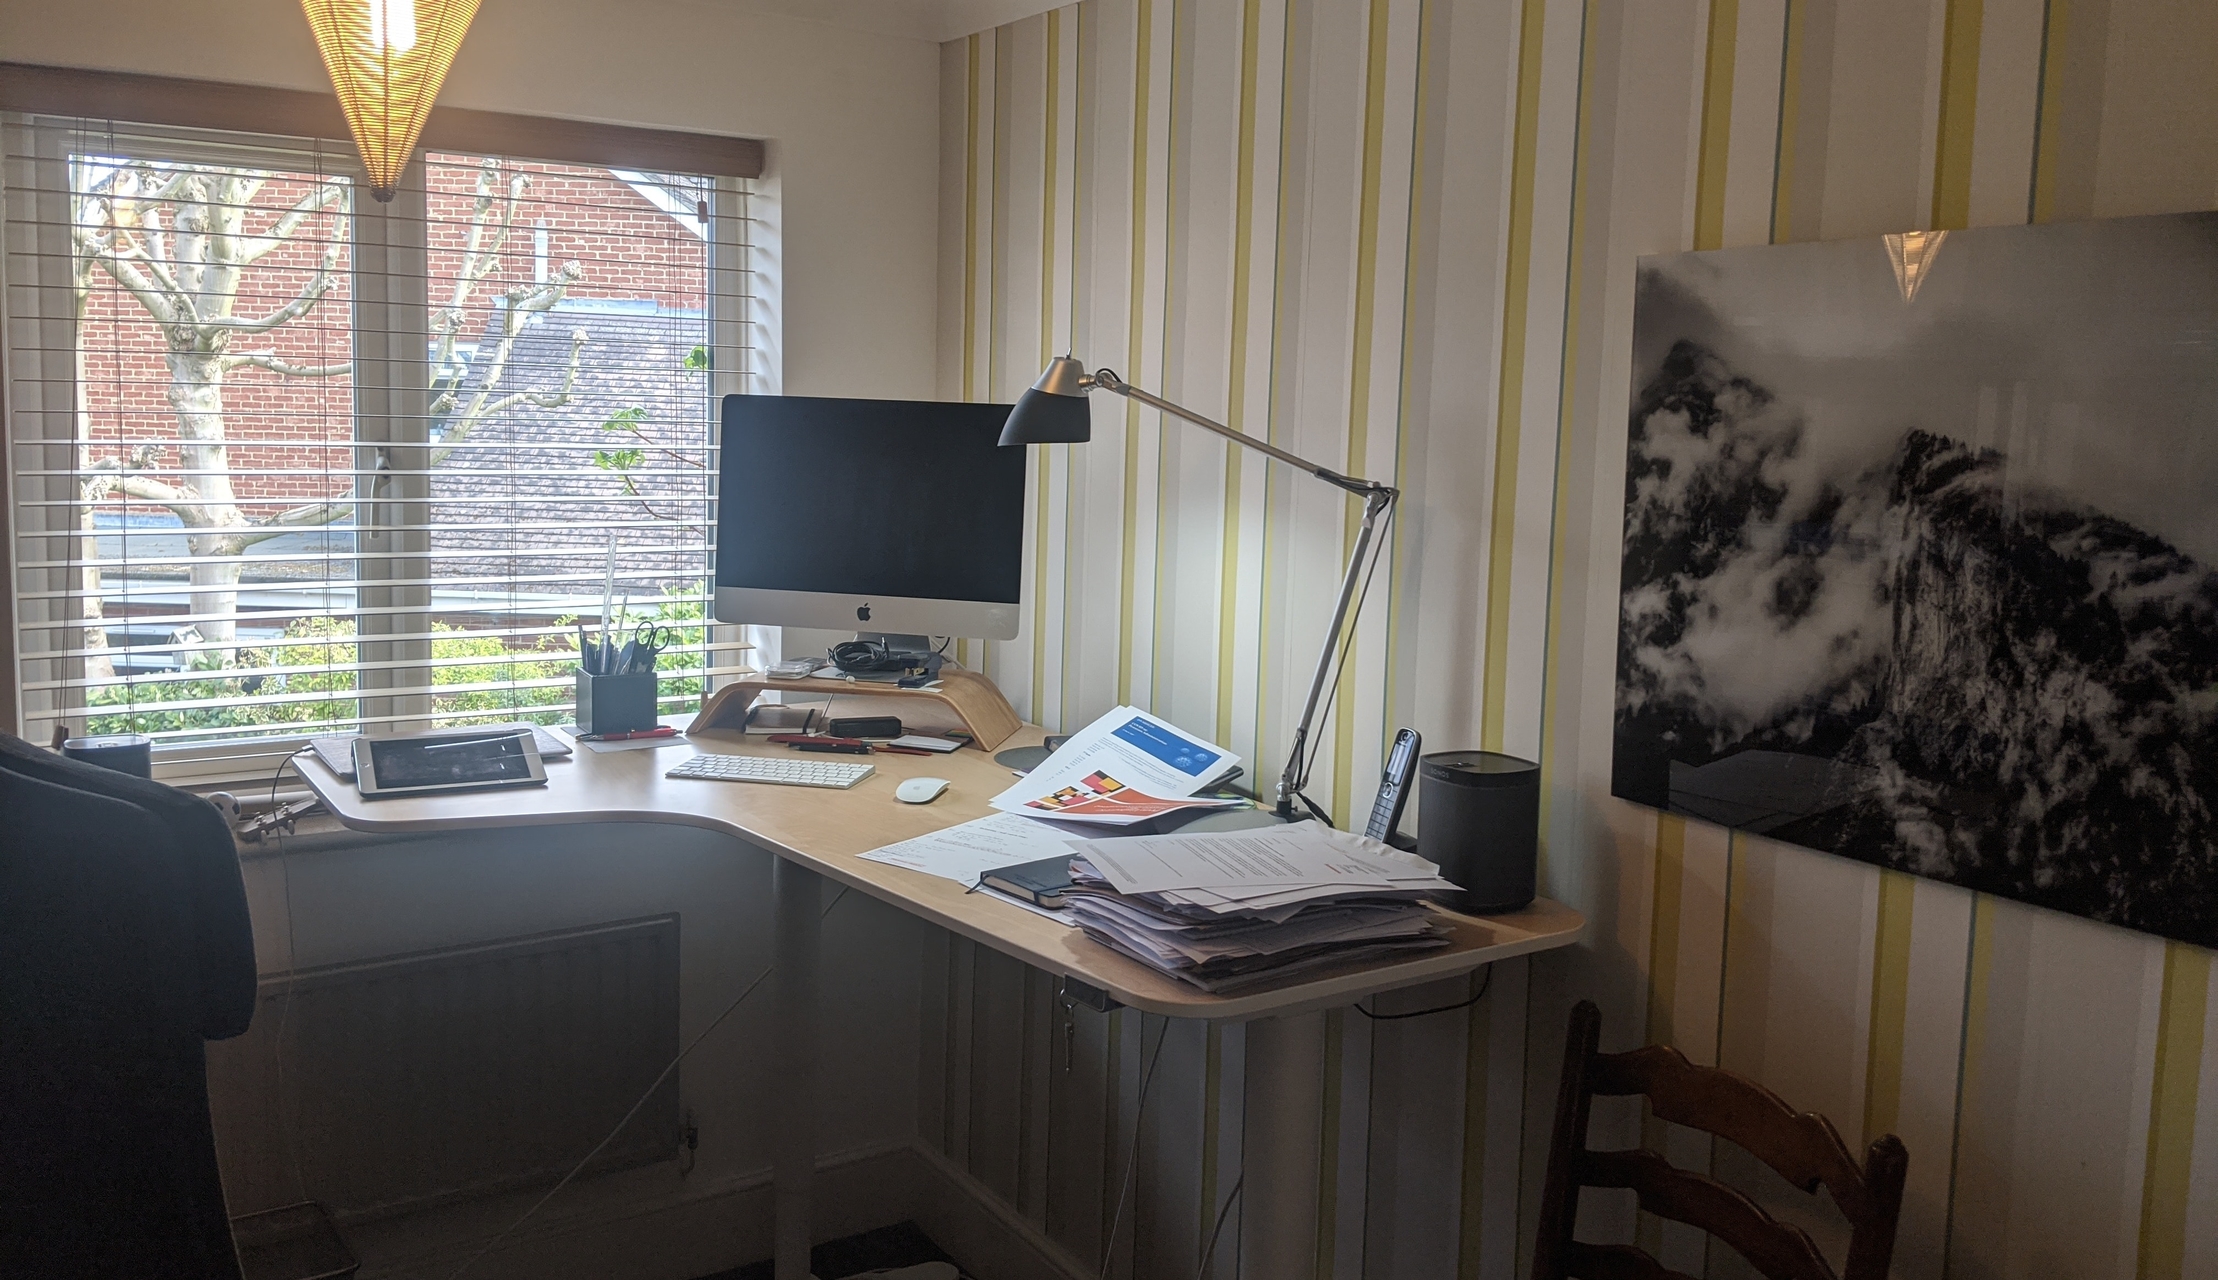 An example home working desk in a home office